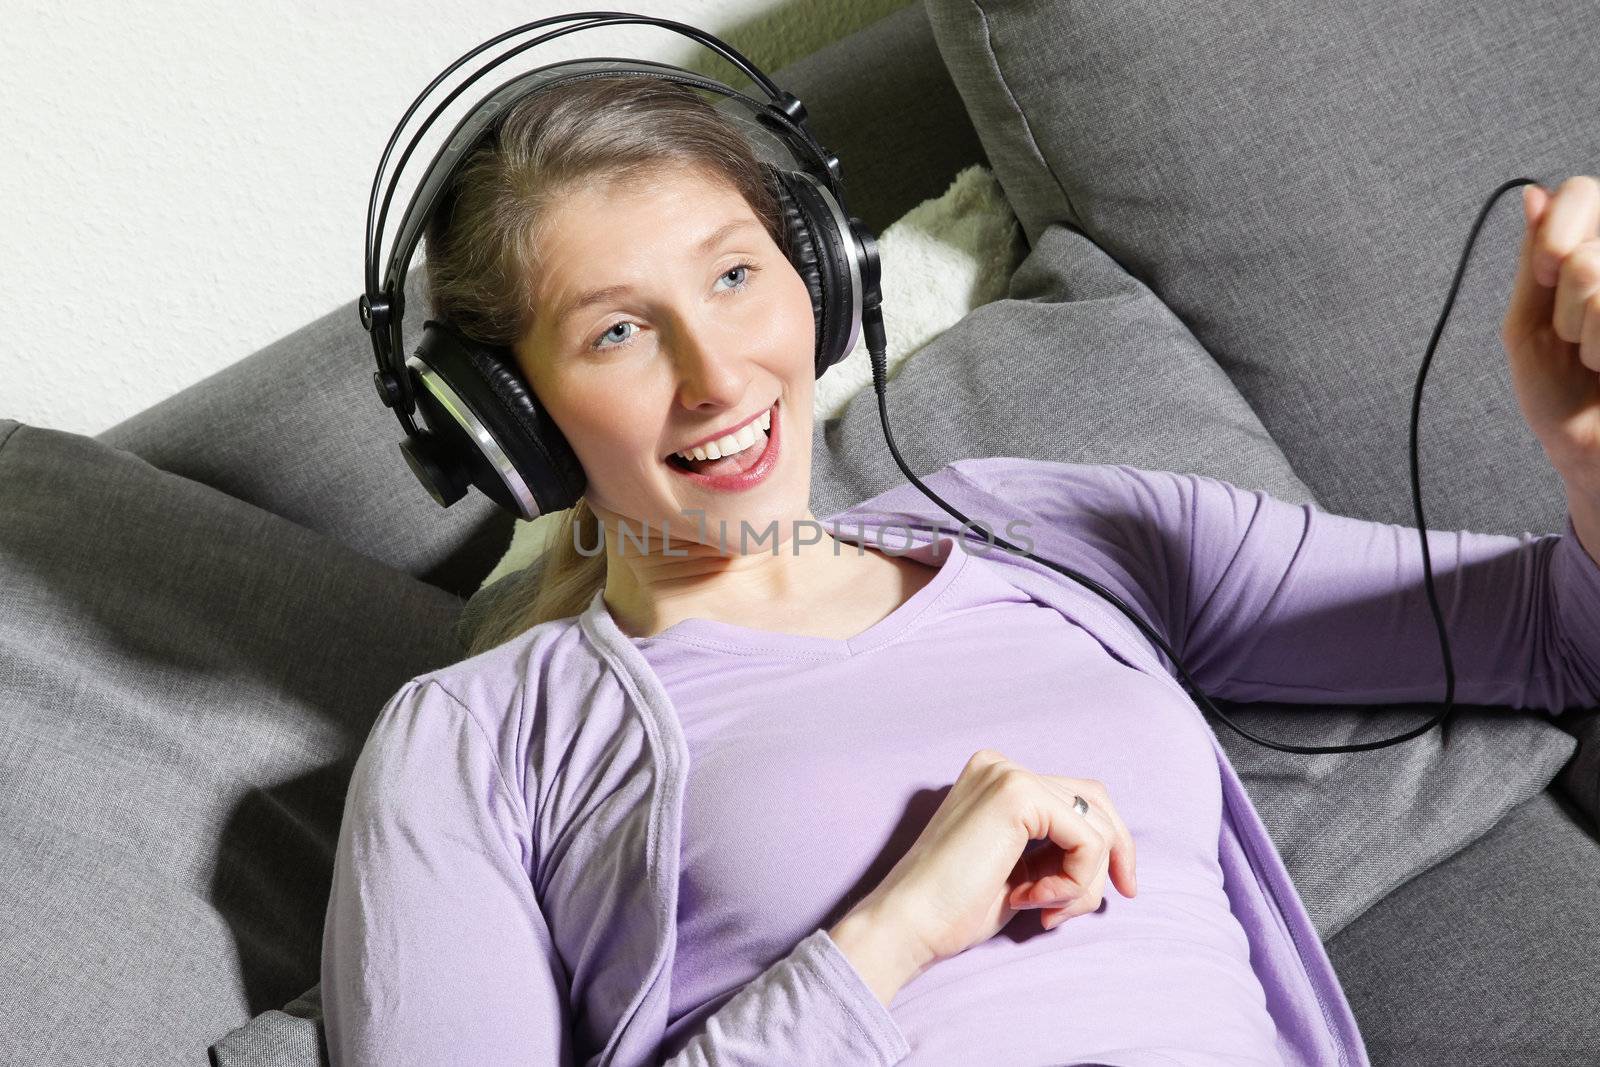 Attractive vivacious middle-aged woman enjoying music and laughing as she follows the beat while sitting on a sofa in the living room